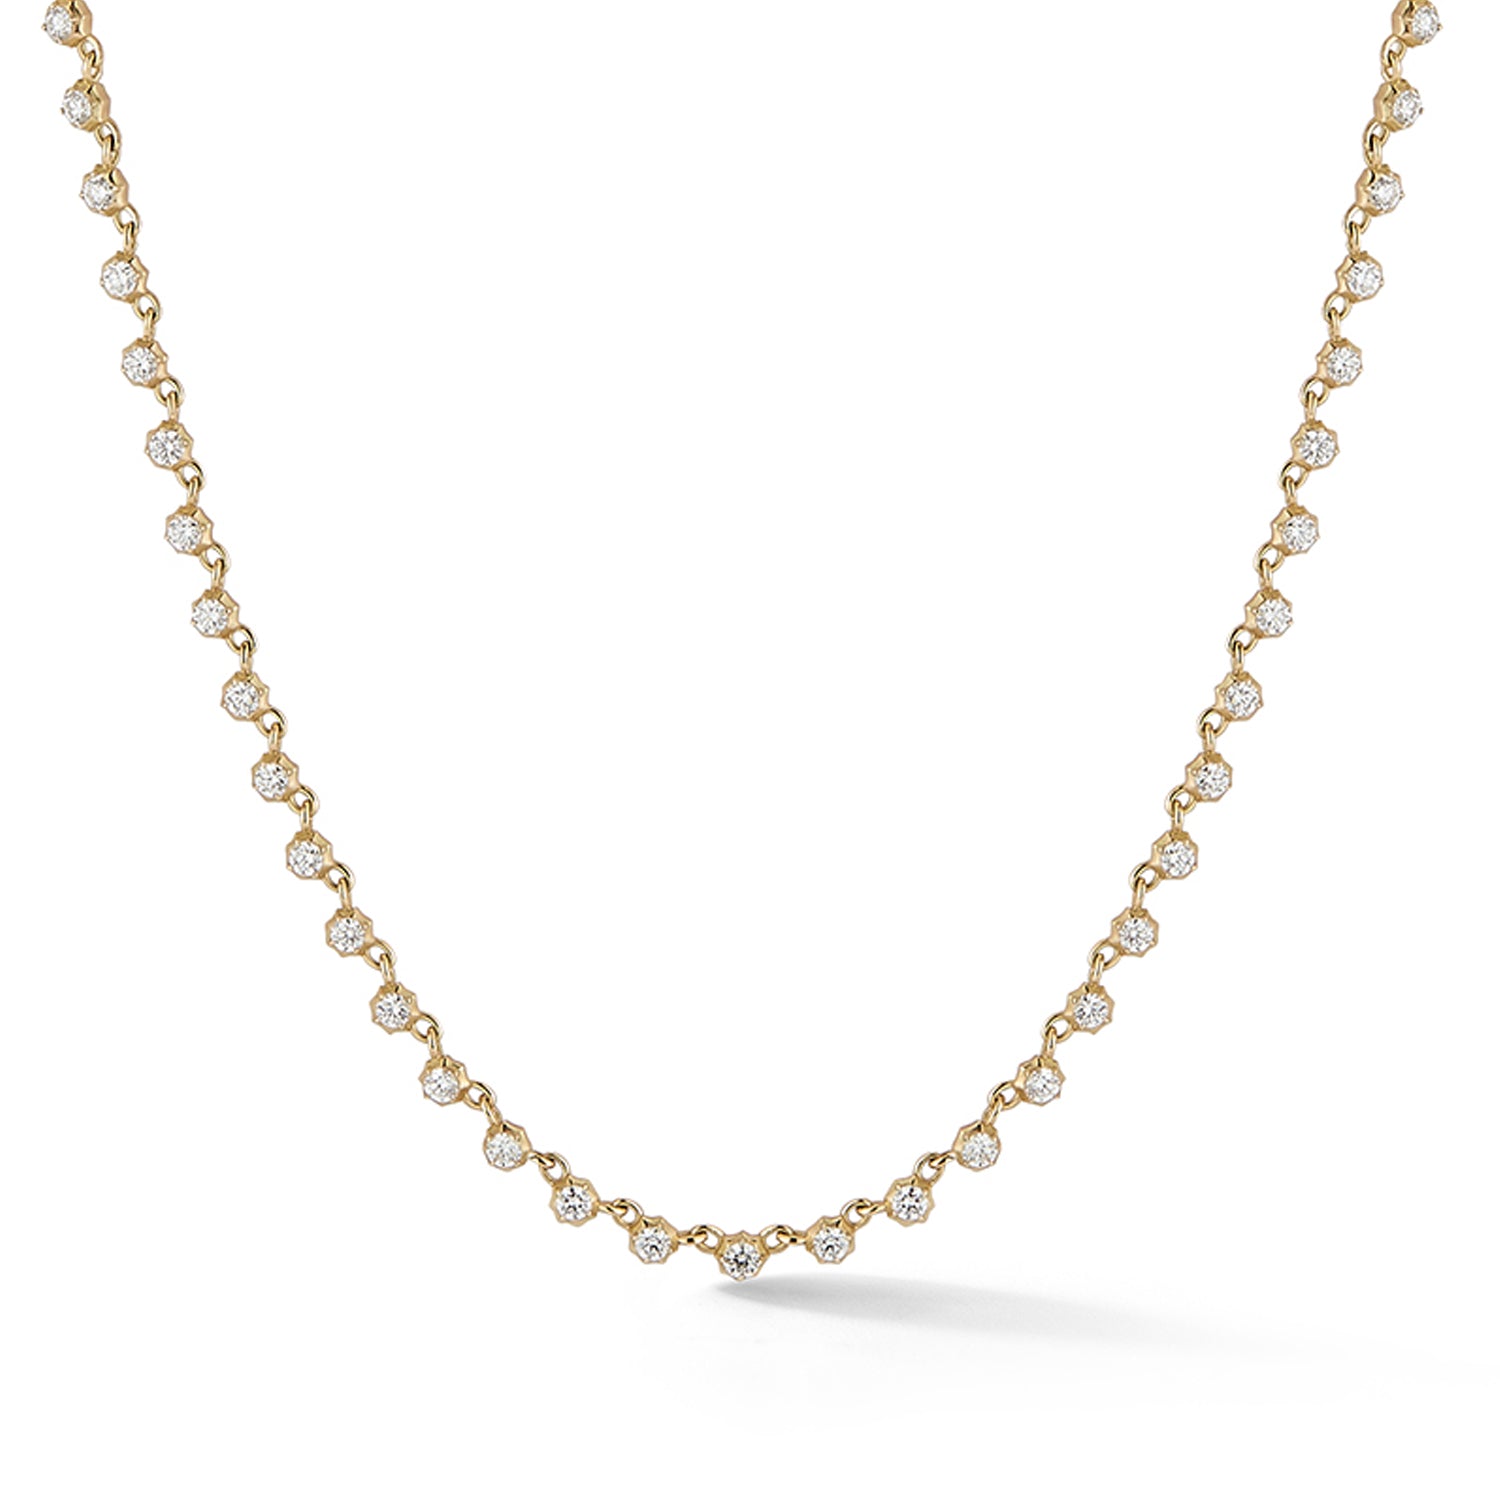 Small Sophisticate Riviera Choker in 18K Yellow Gold